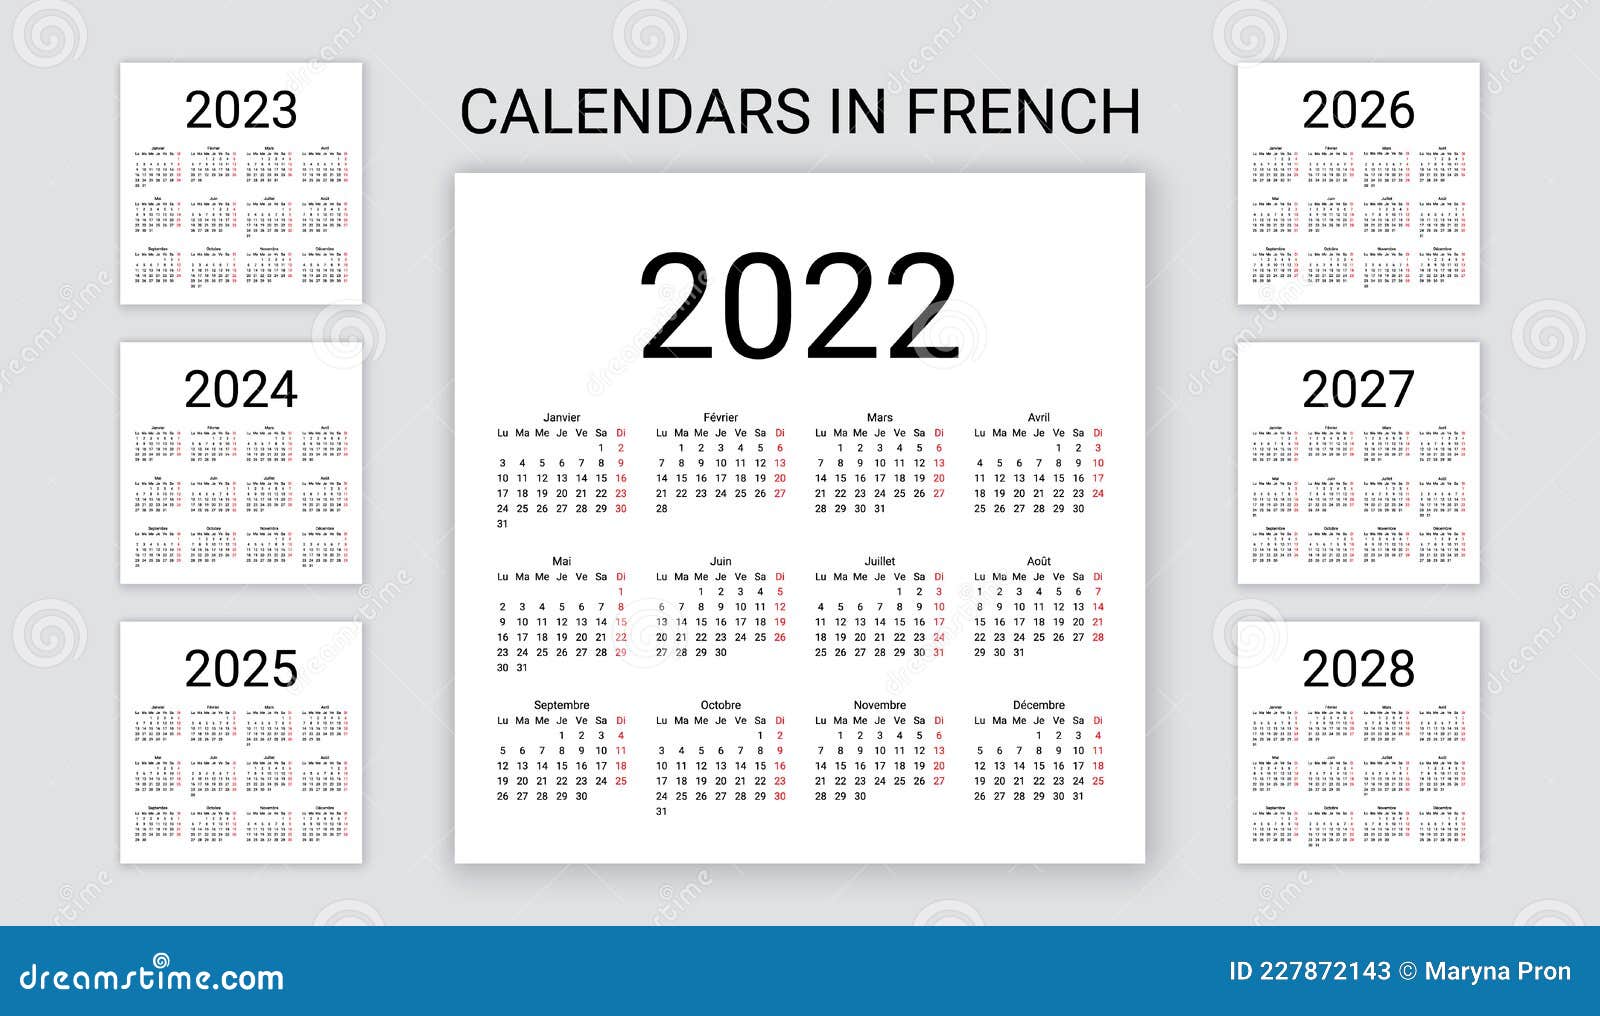 French Calendar 2022, 2023, 2024, 2025, 2026, 2027, 2028 Years. Vector